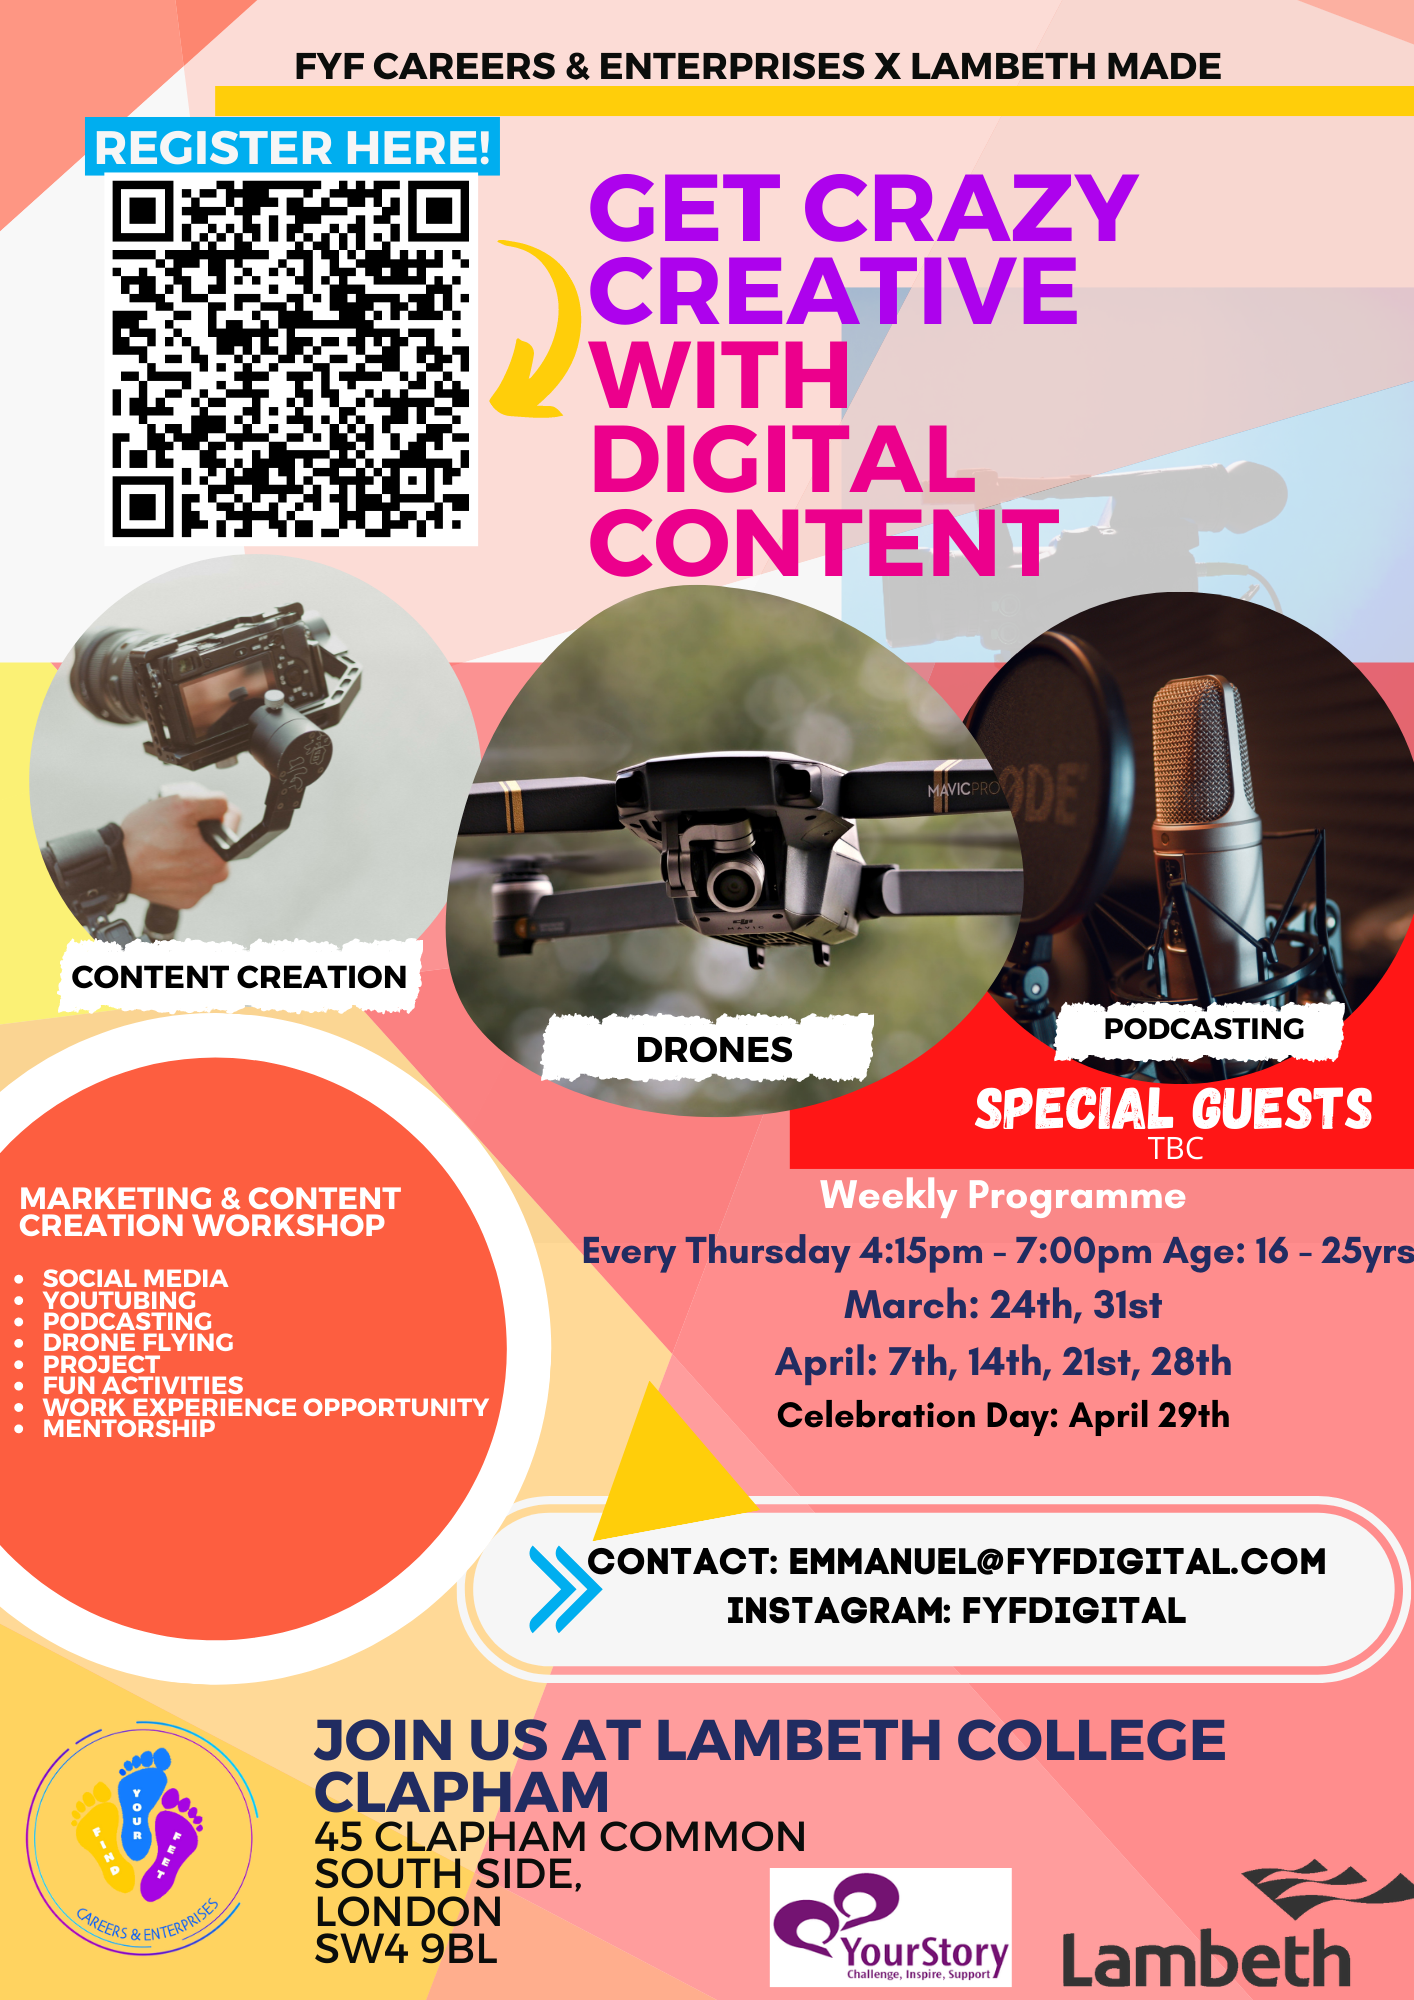 Digital Content event flyer. Free workshops every Thursday in March and April.